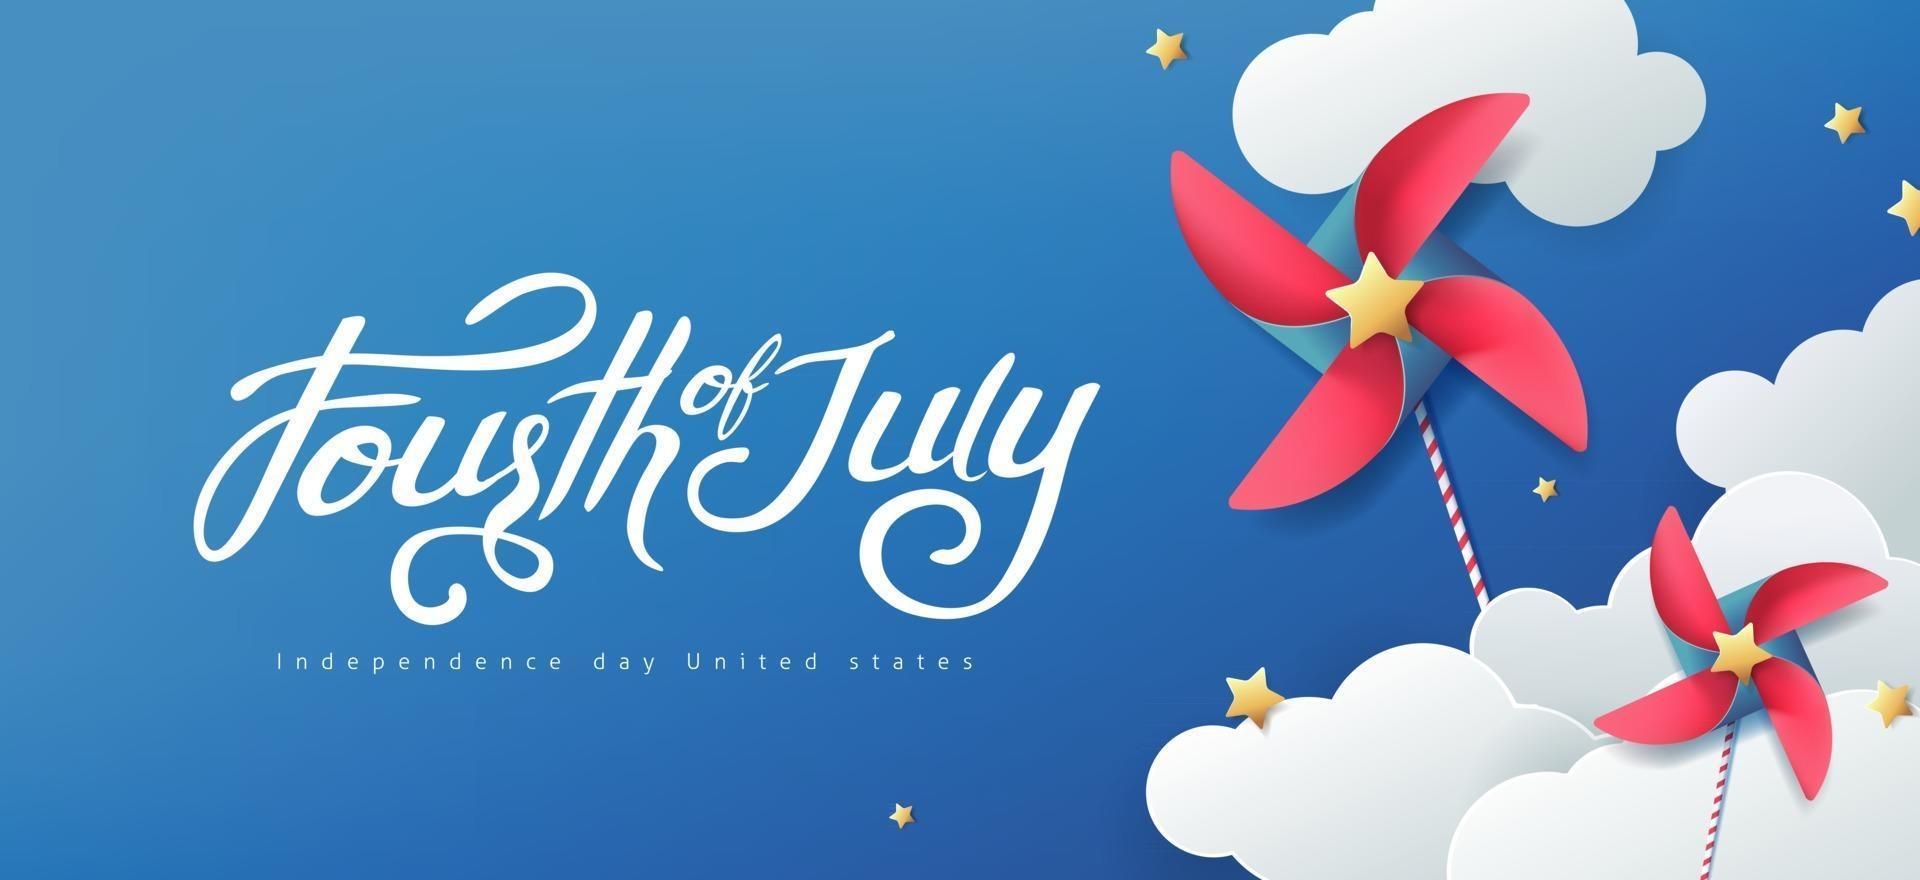 Unabhängigkeitstag usa banner template.4th of July Feier Poster template.fourth of July Vector Illustration.